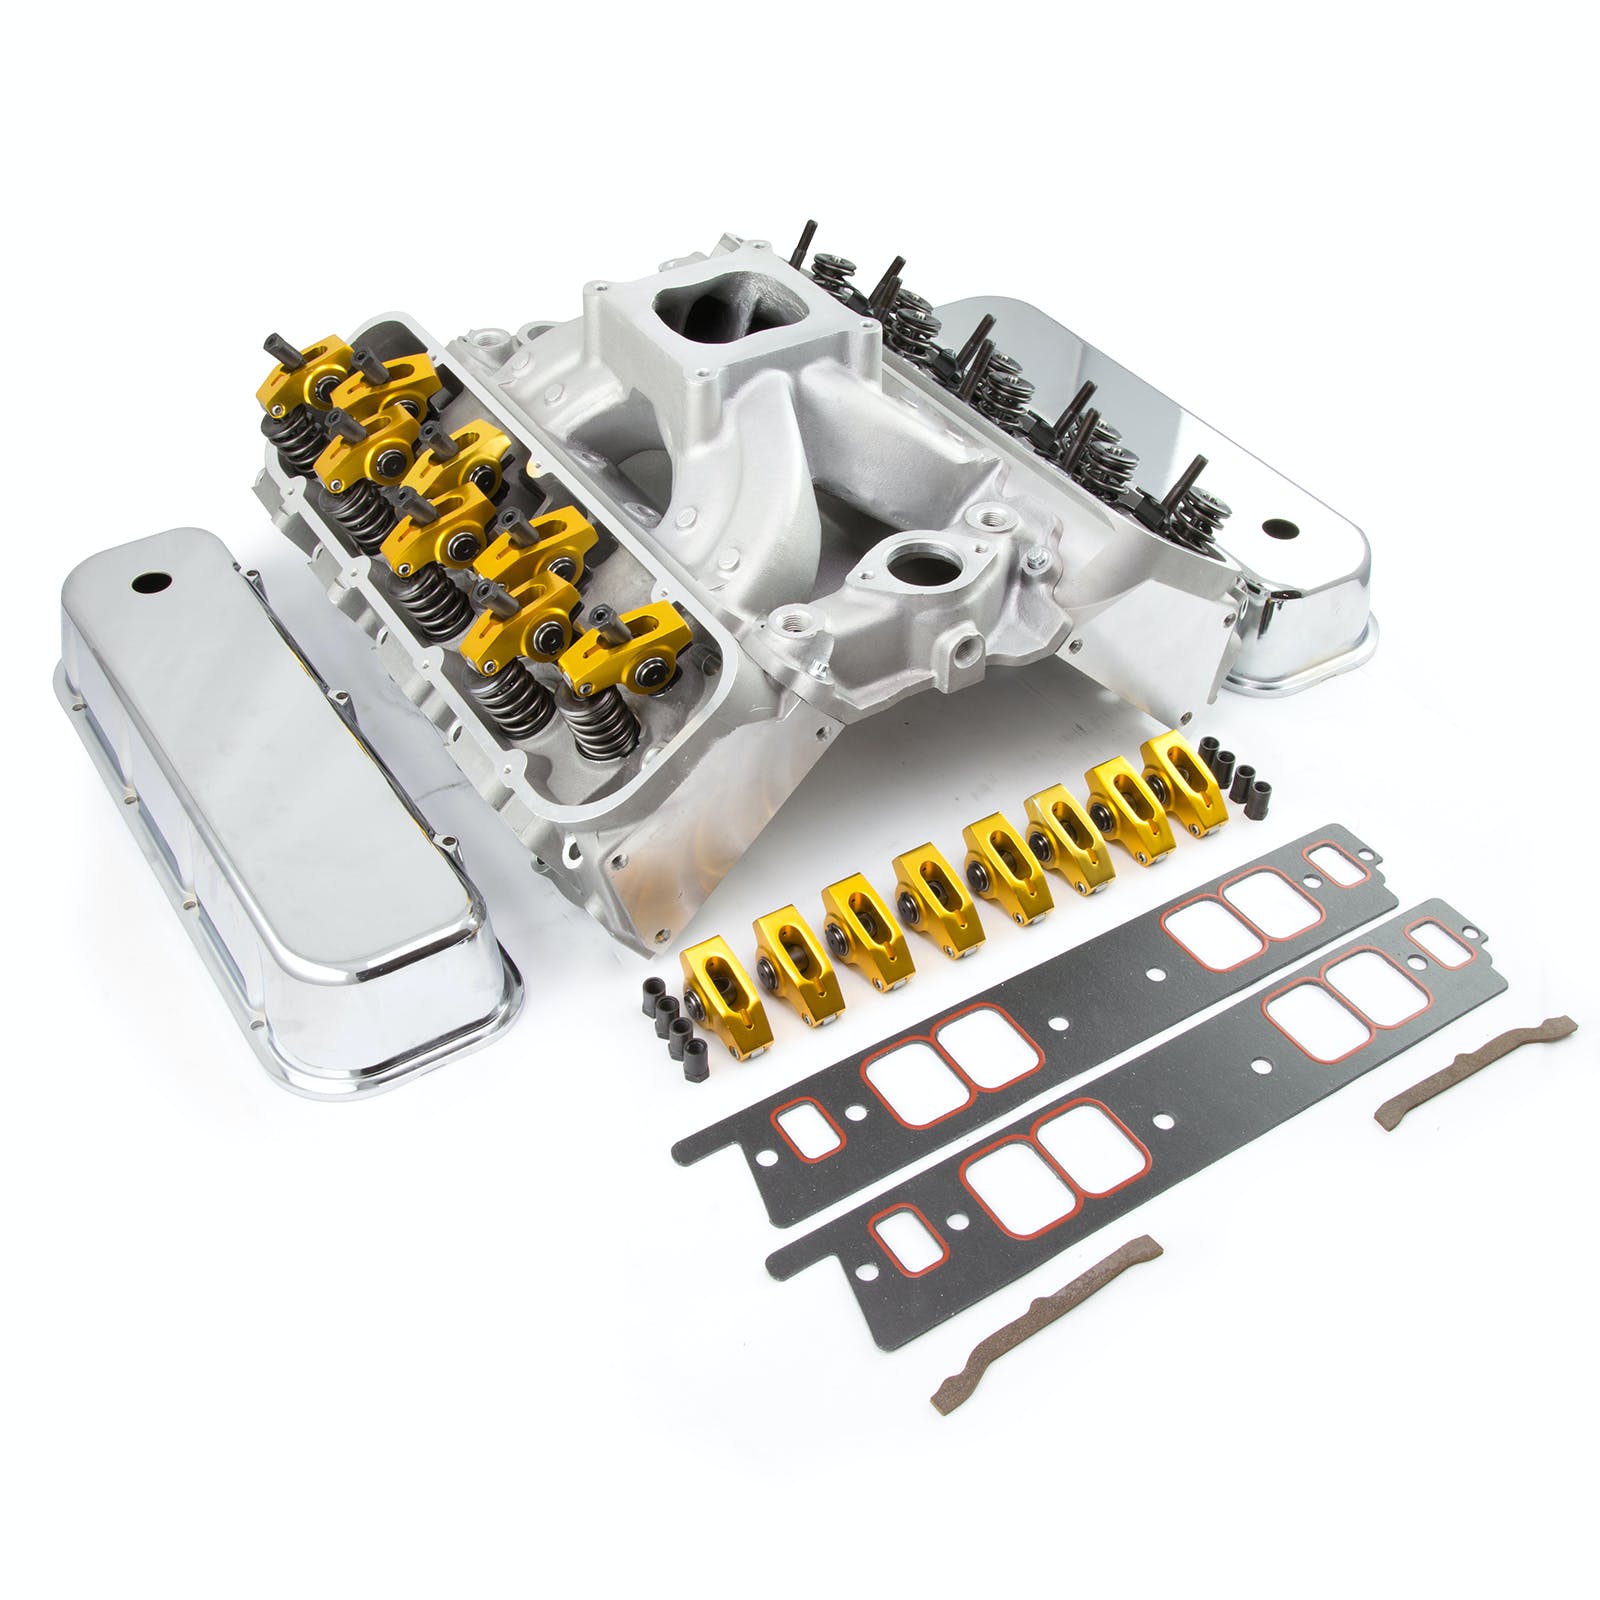 Speedmaster PCE435.1019 Solid FT CNC Cylinder Head Top End Engine Combo Kit